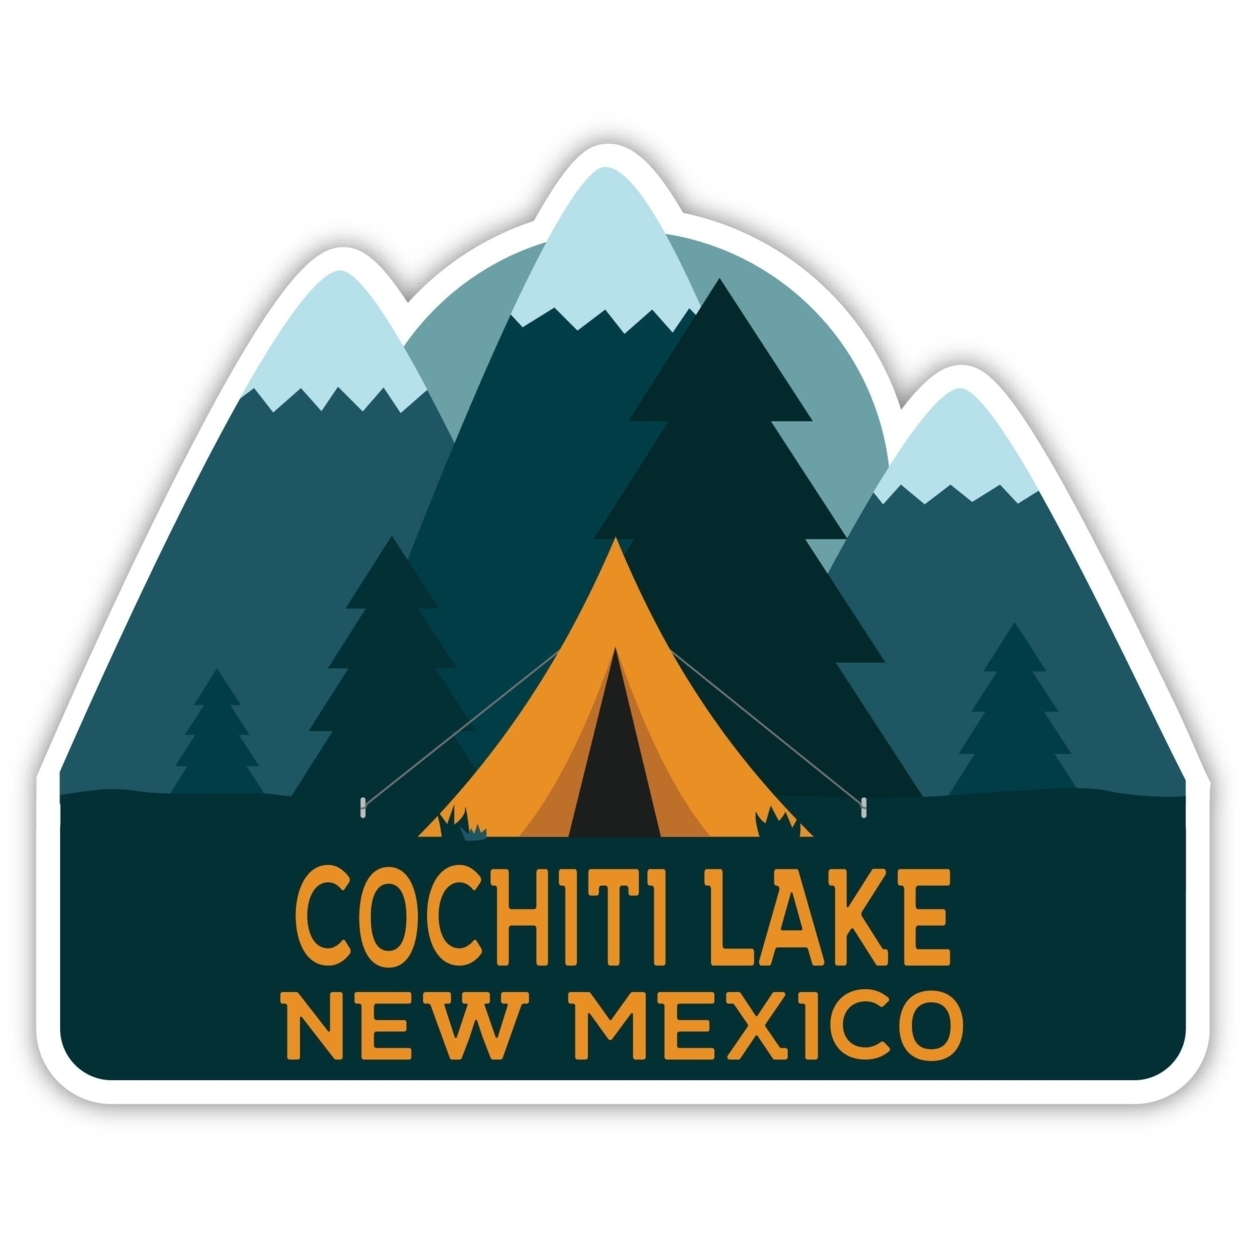 Cochiti Lake New Mexico Souvenir Decorative Stickers (Choose Theme And Size) - 4-Pack, 8-Inch, Tent